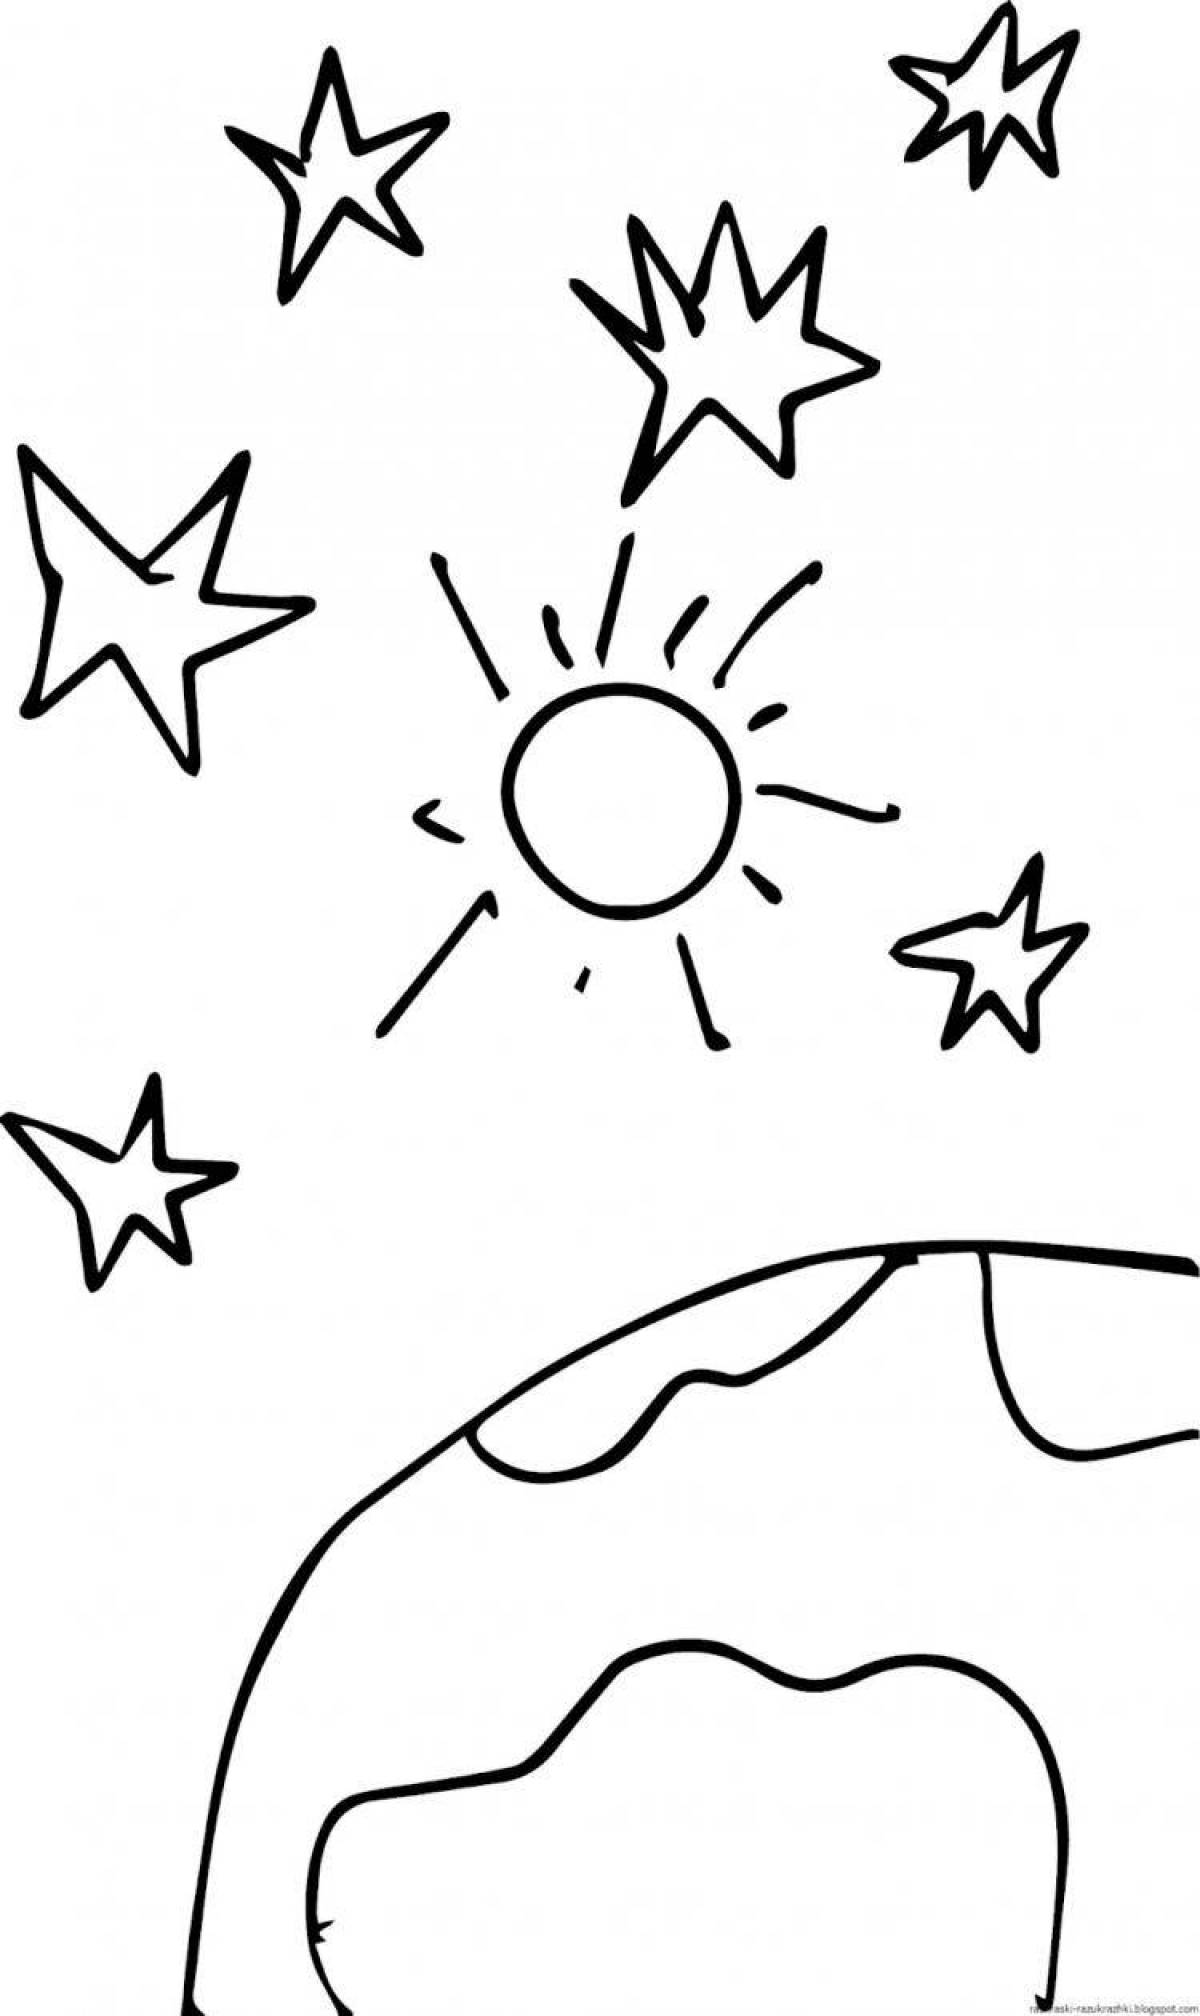 Awesome star coloring pages in the sky